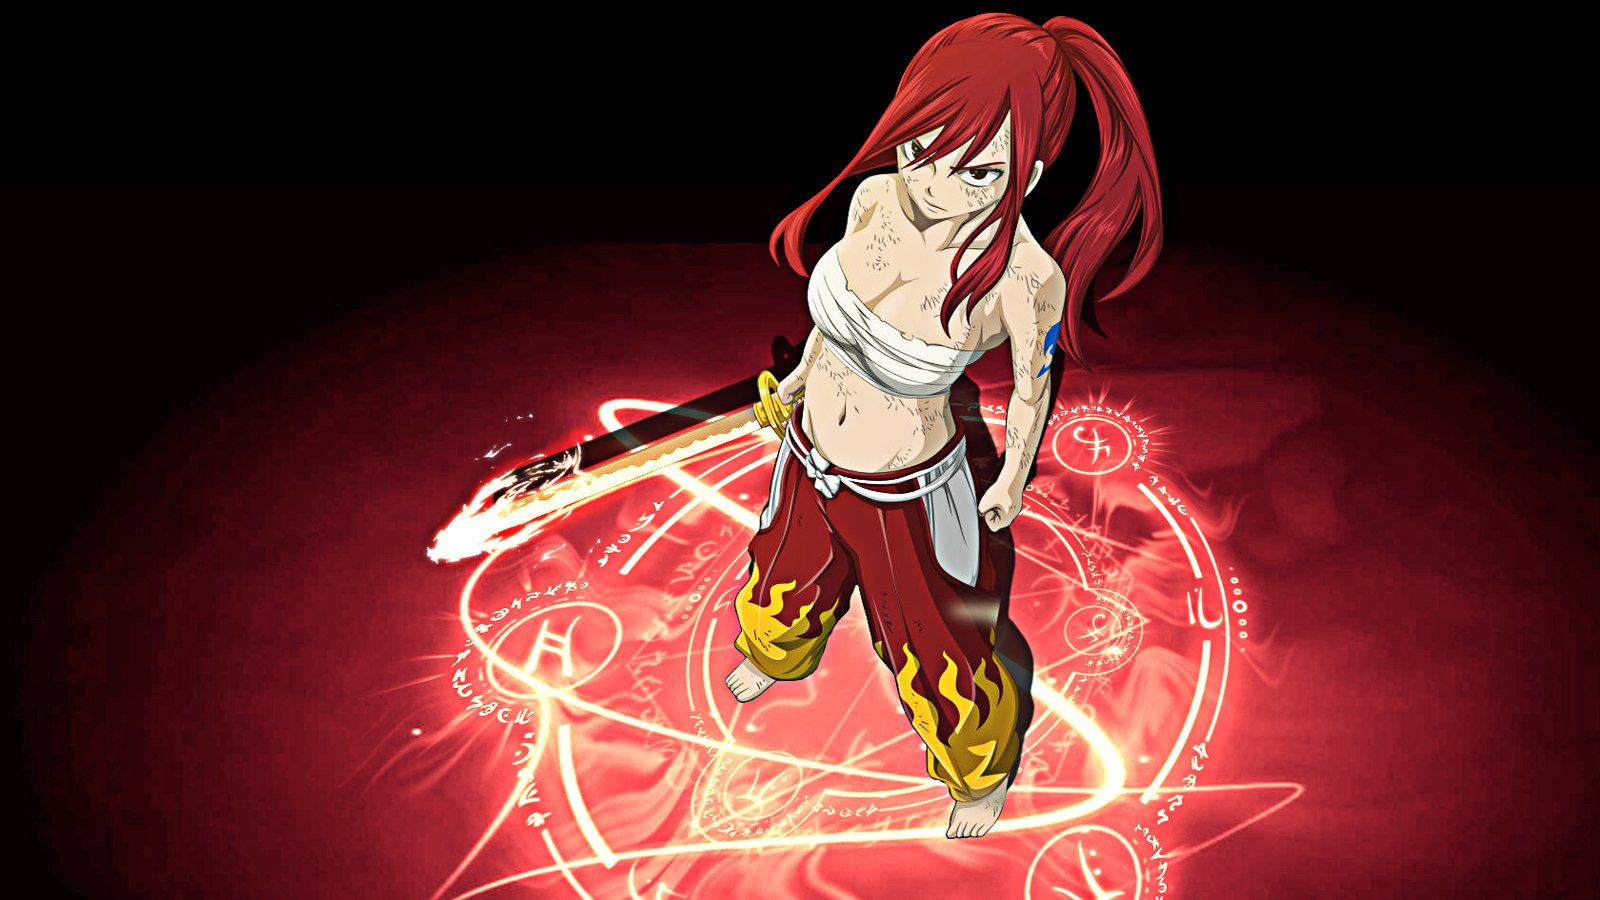 Erza Scarlet Anime Girl 0g Wallpapers Hd.